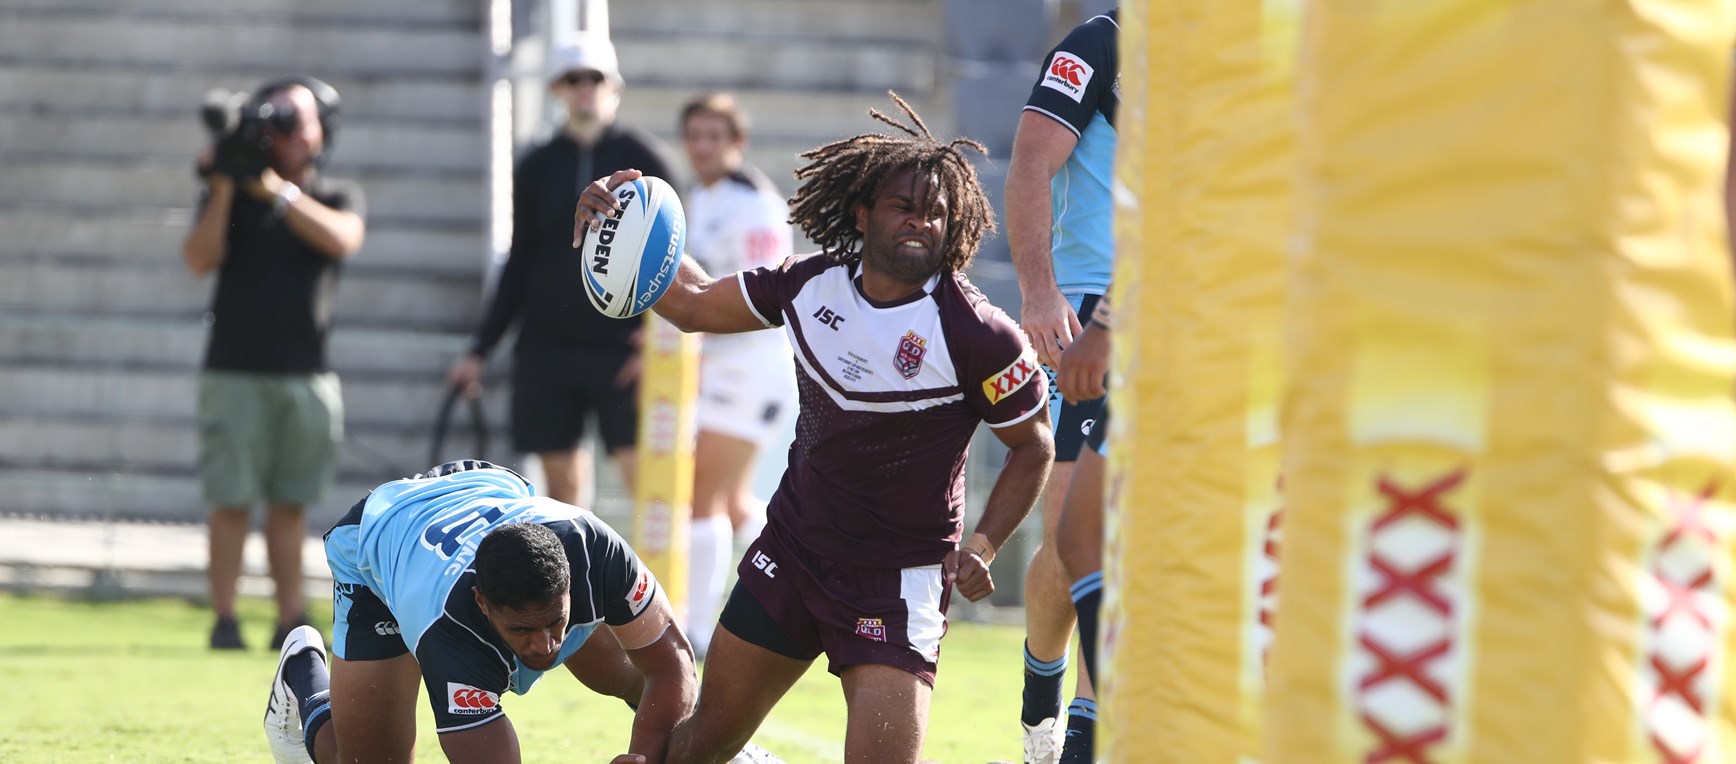 In pictures: Queensland come out on top in Residents clash